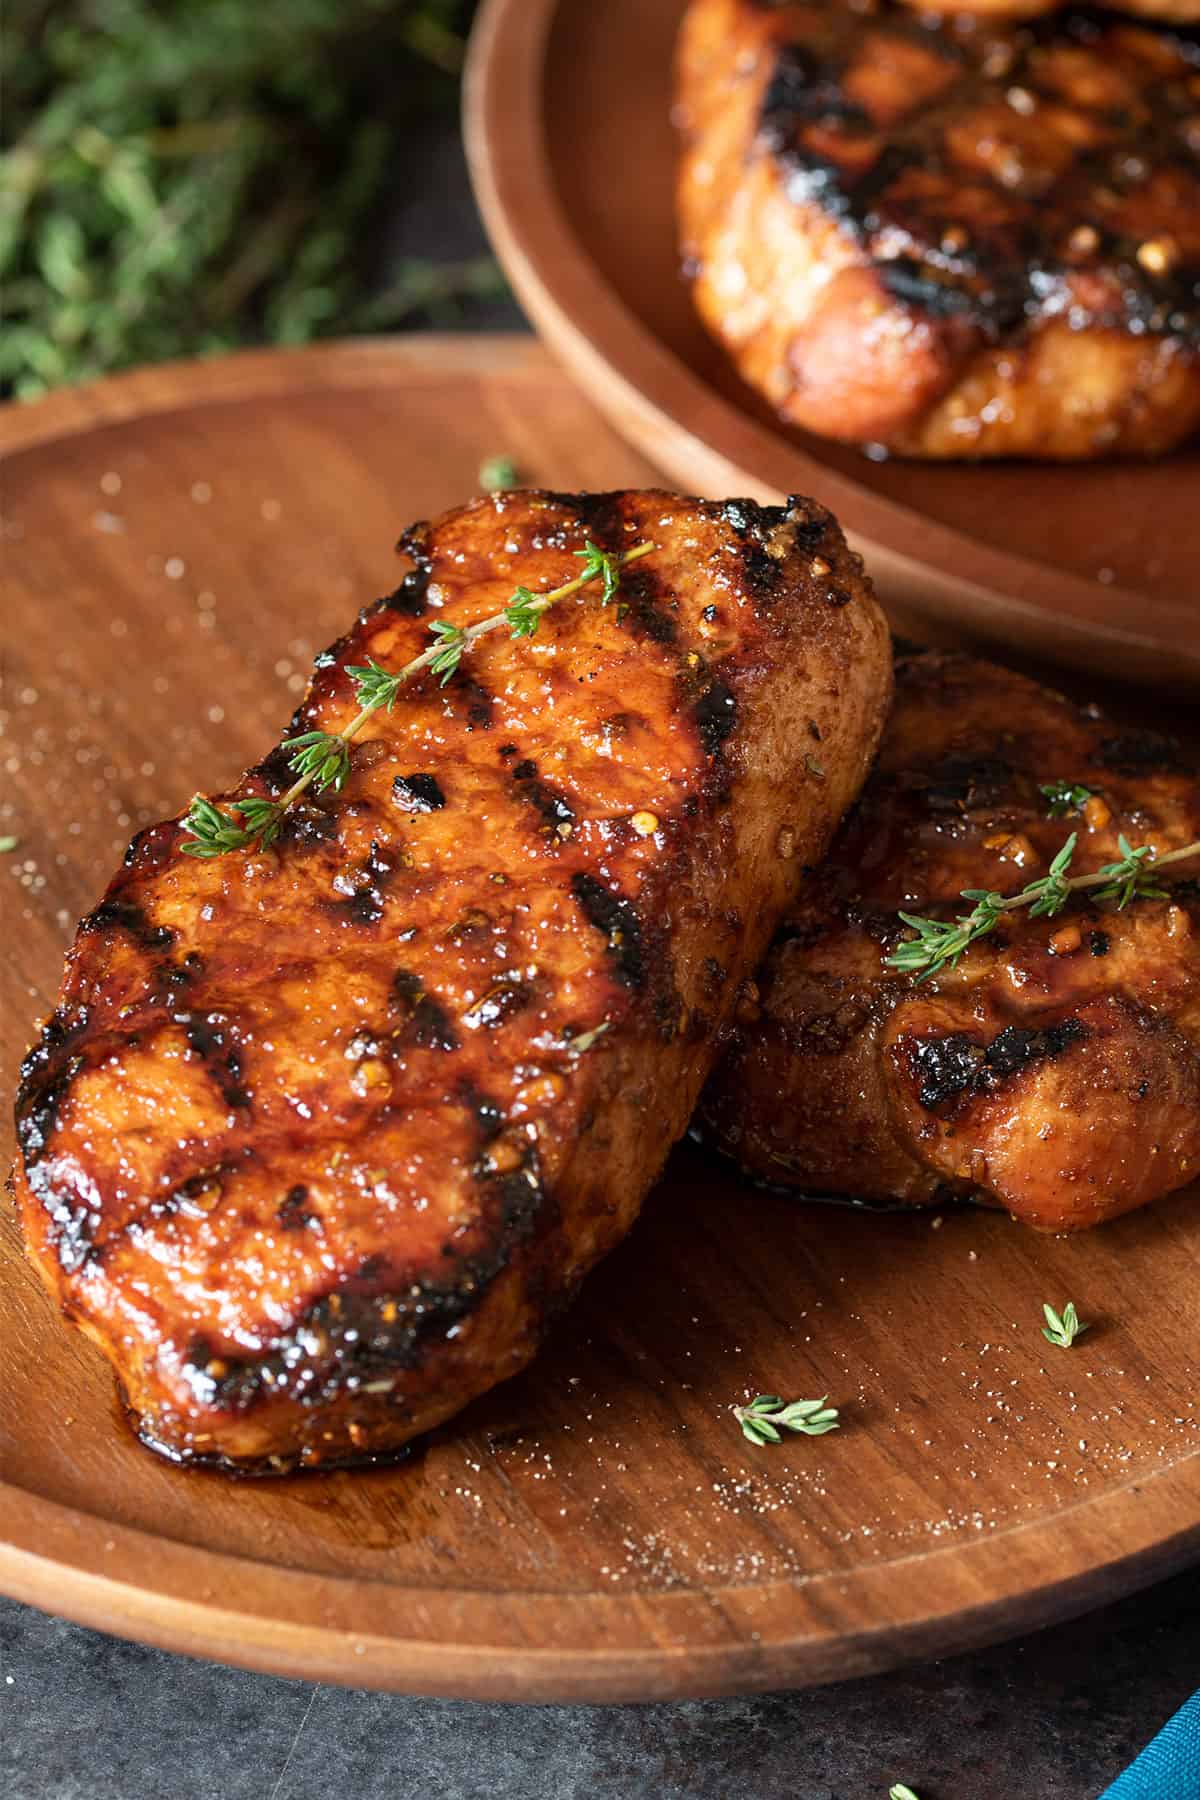 Two grilled pork chops with grill marks laid out on a wooden background.